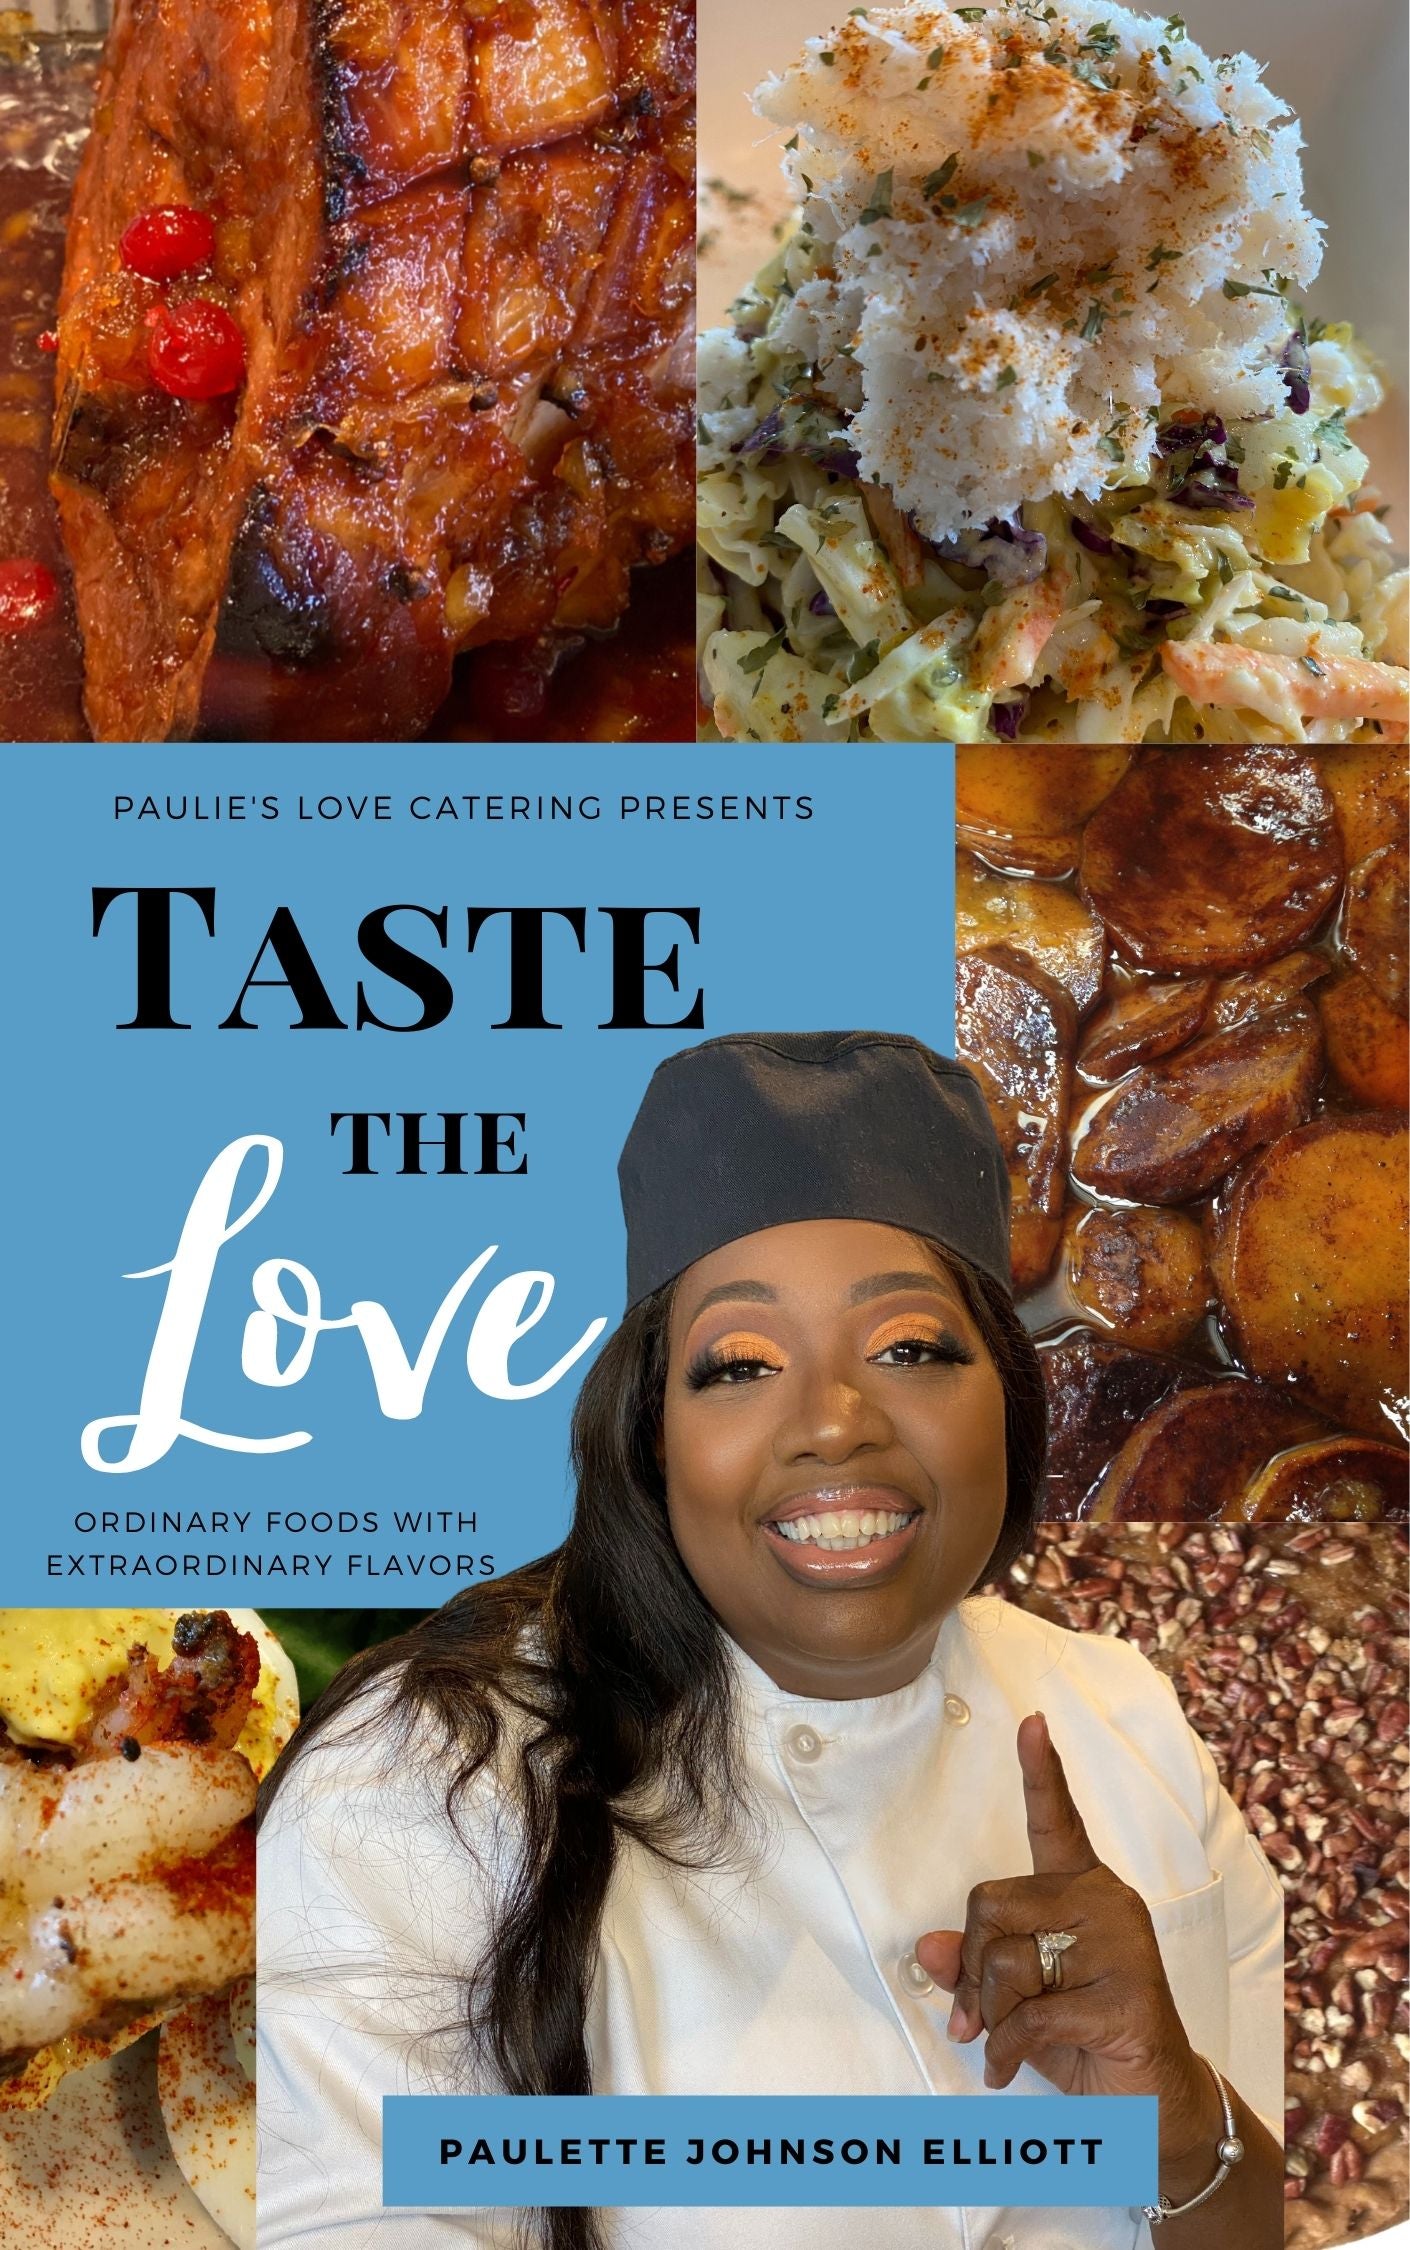 catering – Love is in the food